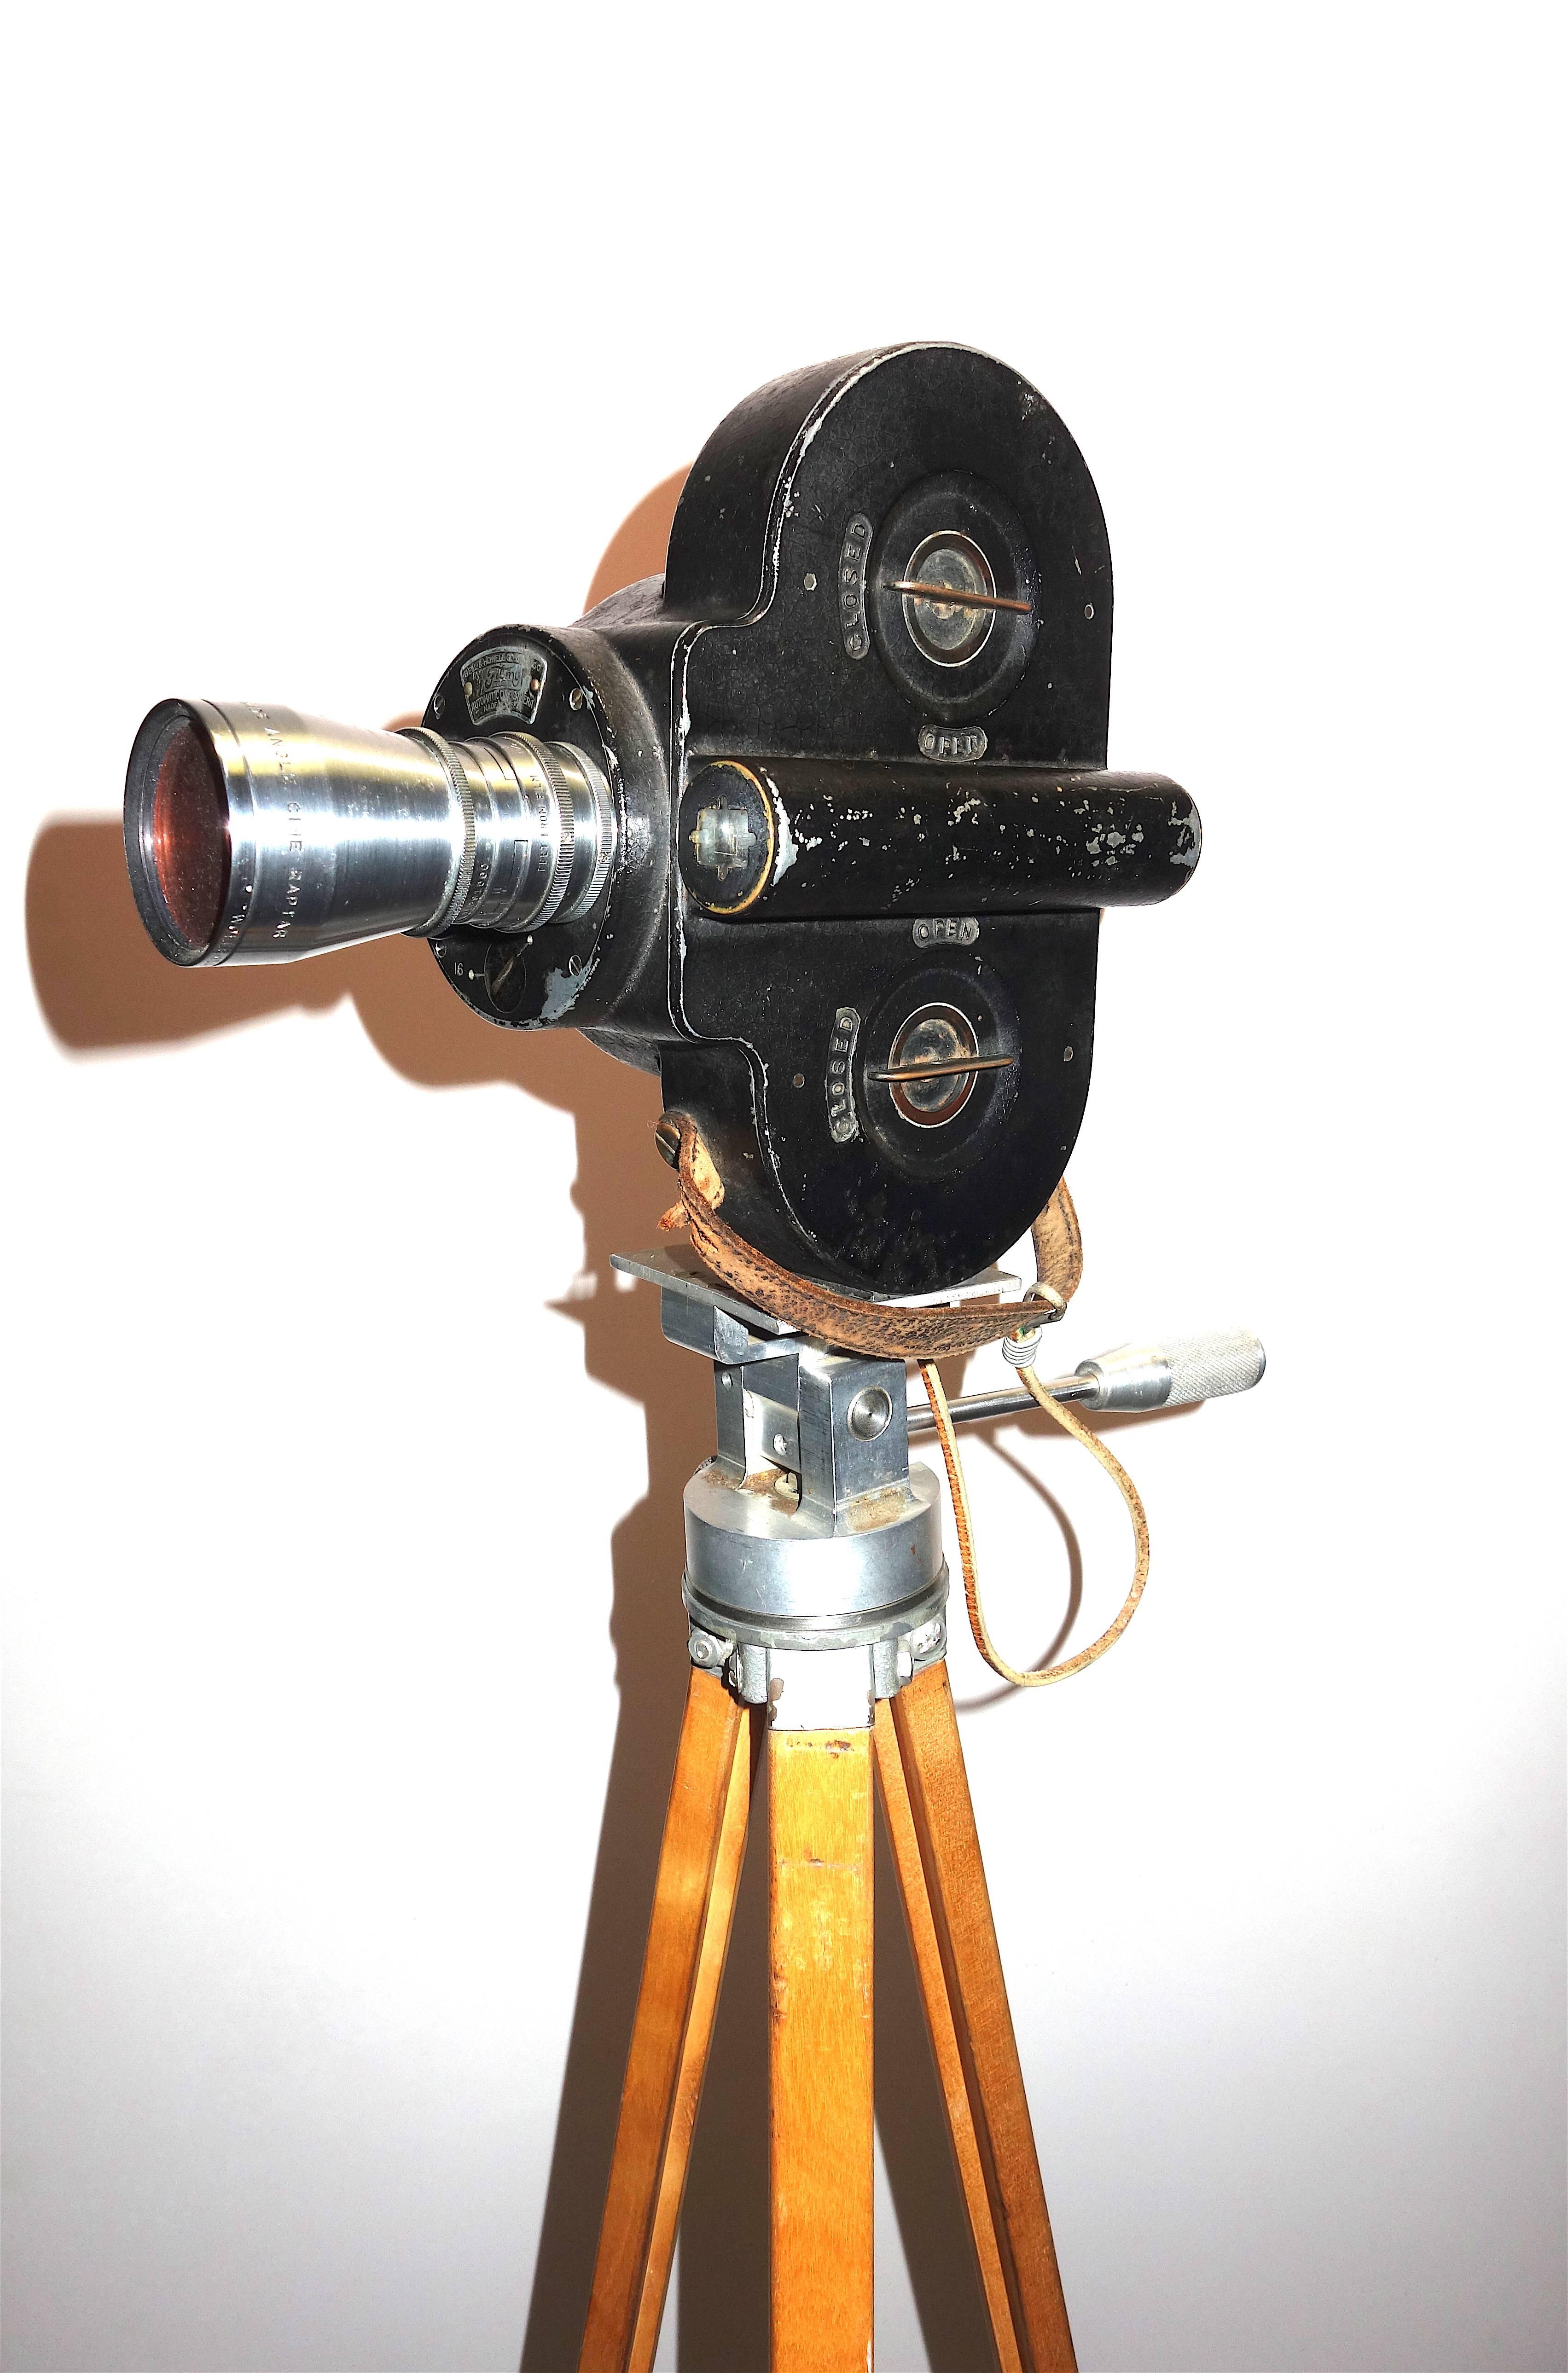 Offered for your approval is this early 20th century USA made Bell & Howell 16mm Motion Picture Camera displayed on vintage wood tripod legs.

This is an outstanding example of a 16mm professional camera with lens and early winding key sitting on a